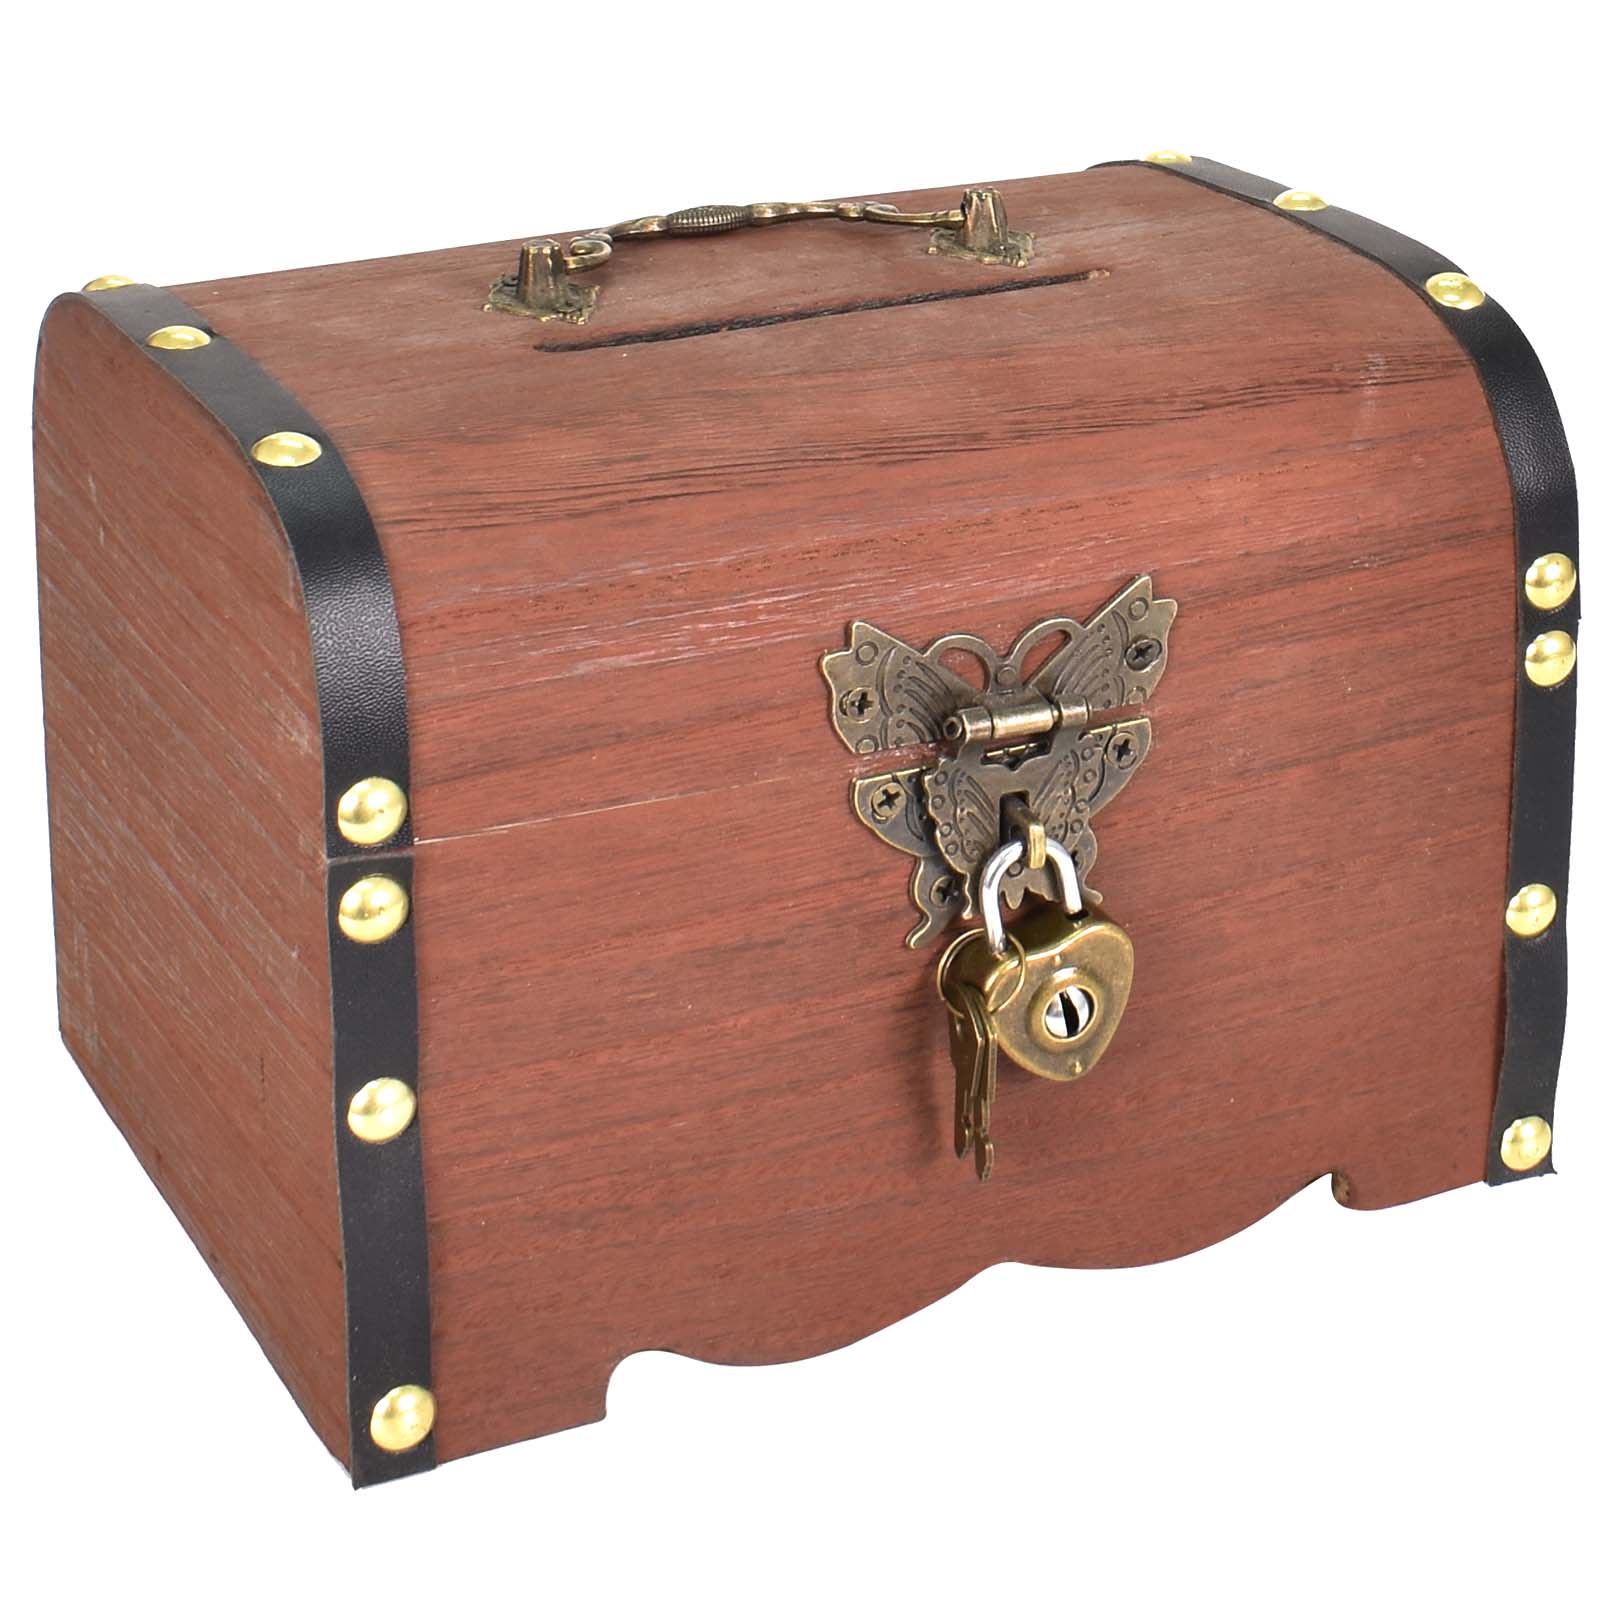 Plastic Transparent Antique Pirate Treasure Box with Lock and Key, Treasure  Toy Box Prizes for Kids, Pirate Party Decor